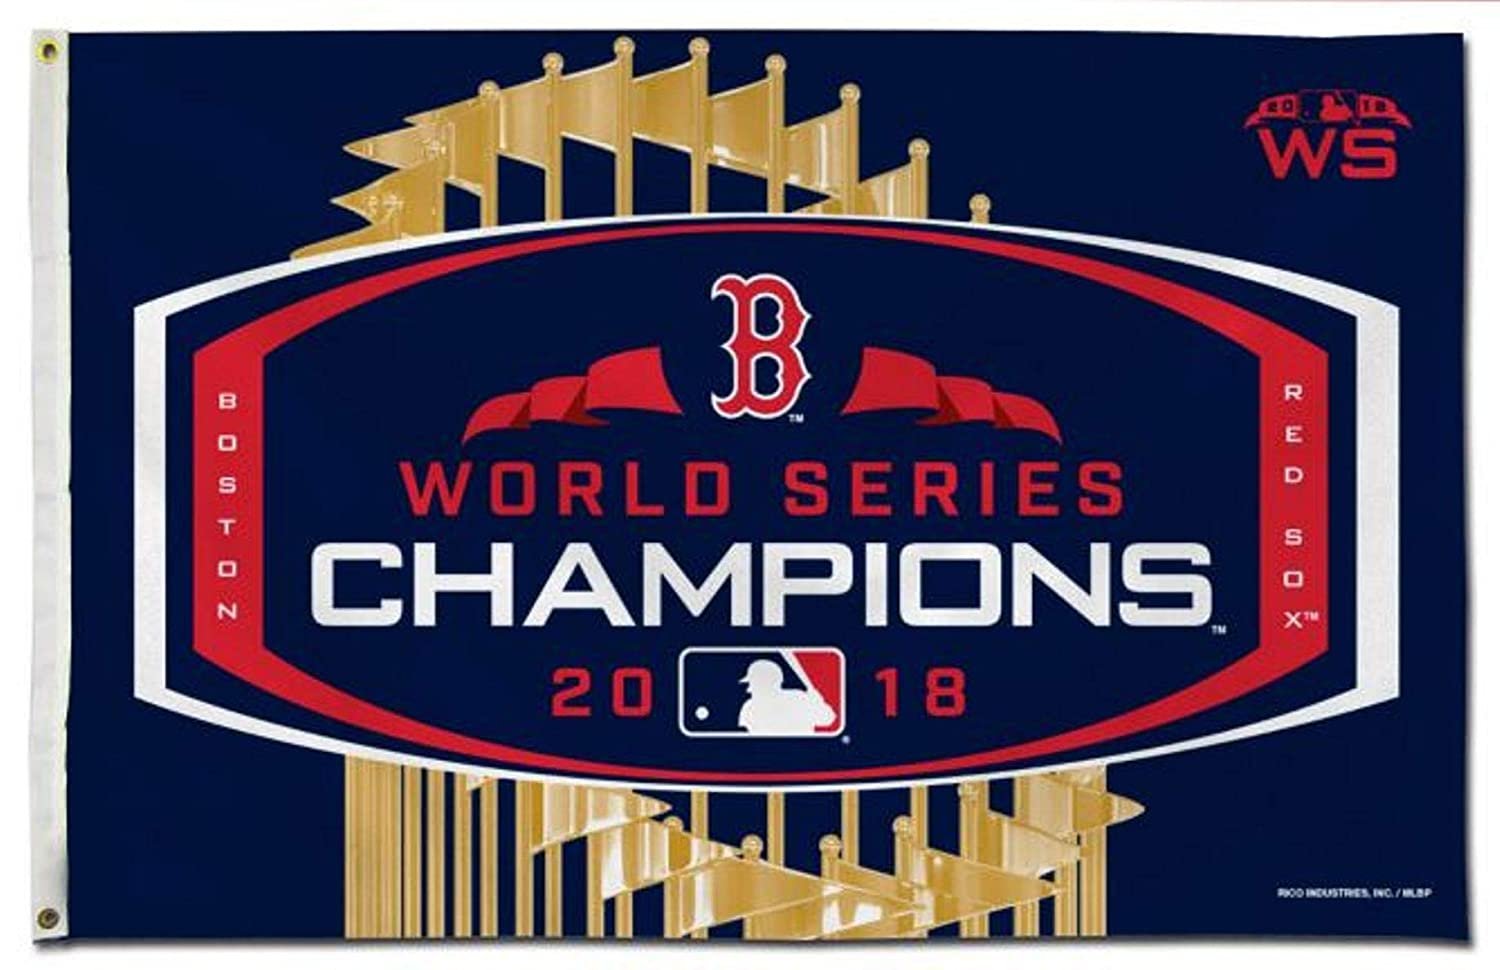 Boston Red Sox 2018 World Series Champions 2018 3x5 Feet Flag Banner, Metal Grommets, Outdoor Indoor Use, Single Sided